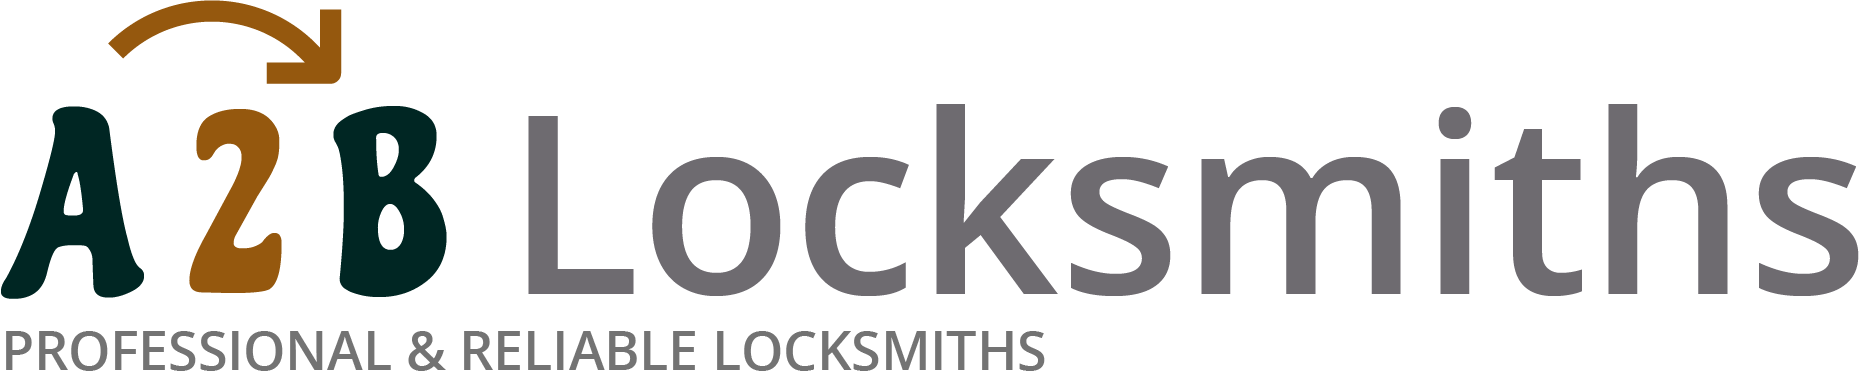 If you are locked out of house in Carshalton, our 24/7 local emergency locksmith services can help you.